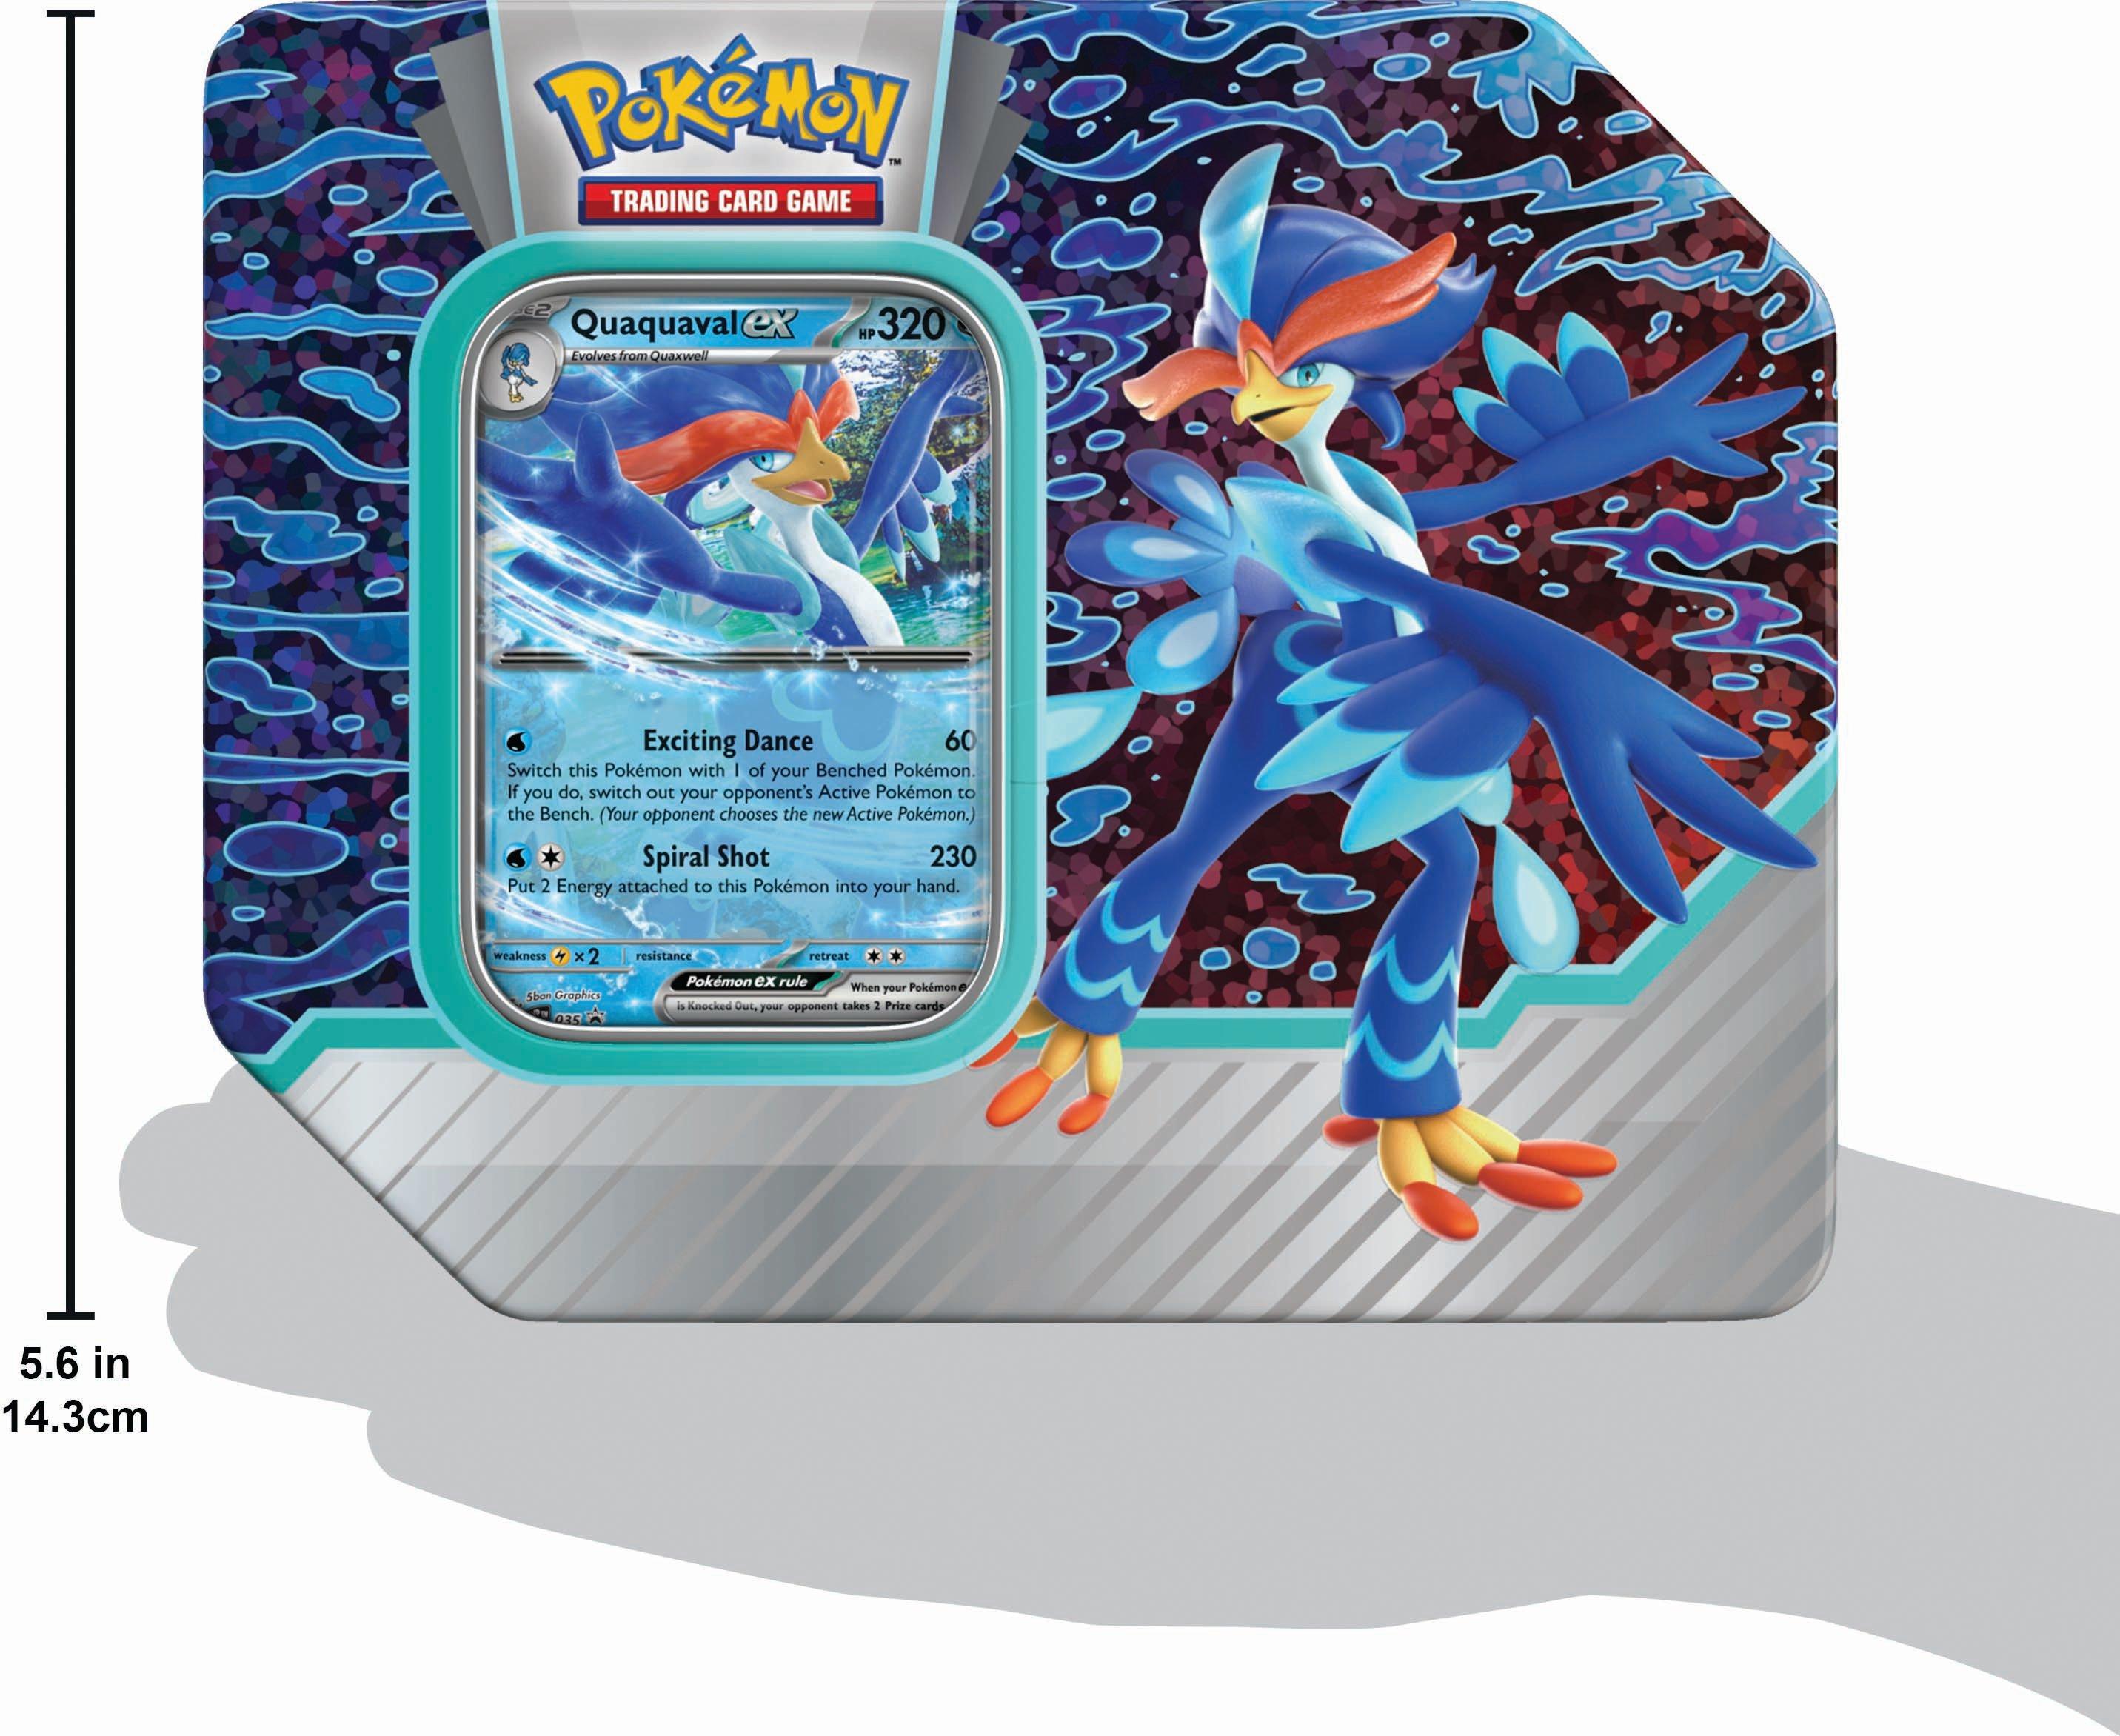 Pokemon Trading Card Game Online Review – In Third Person